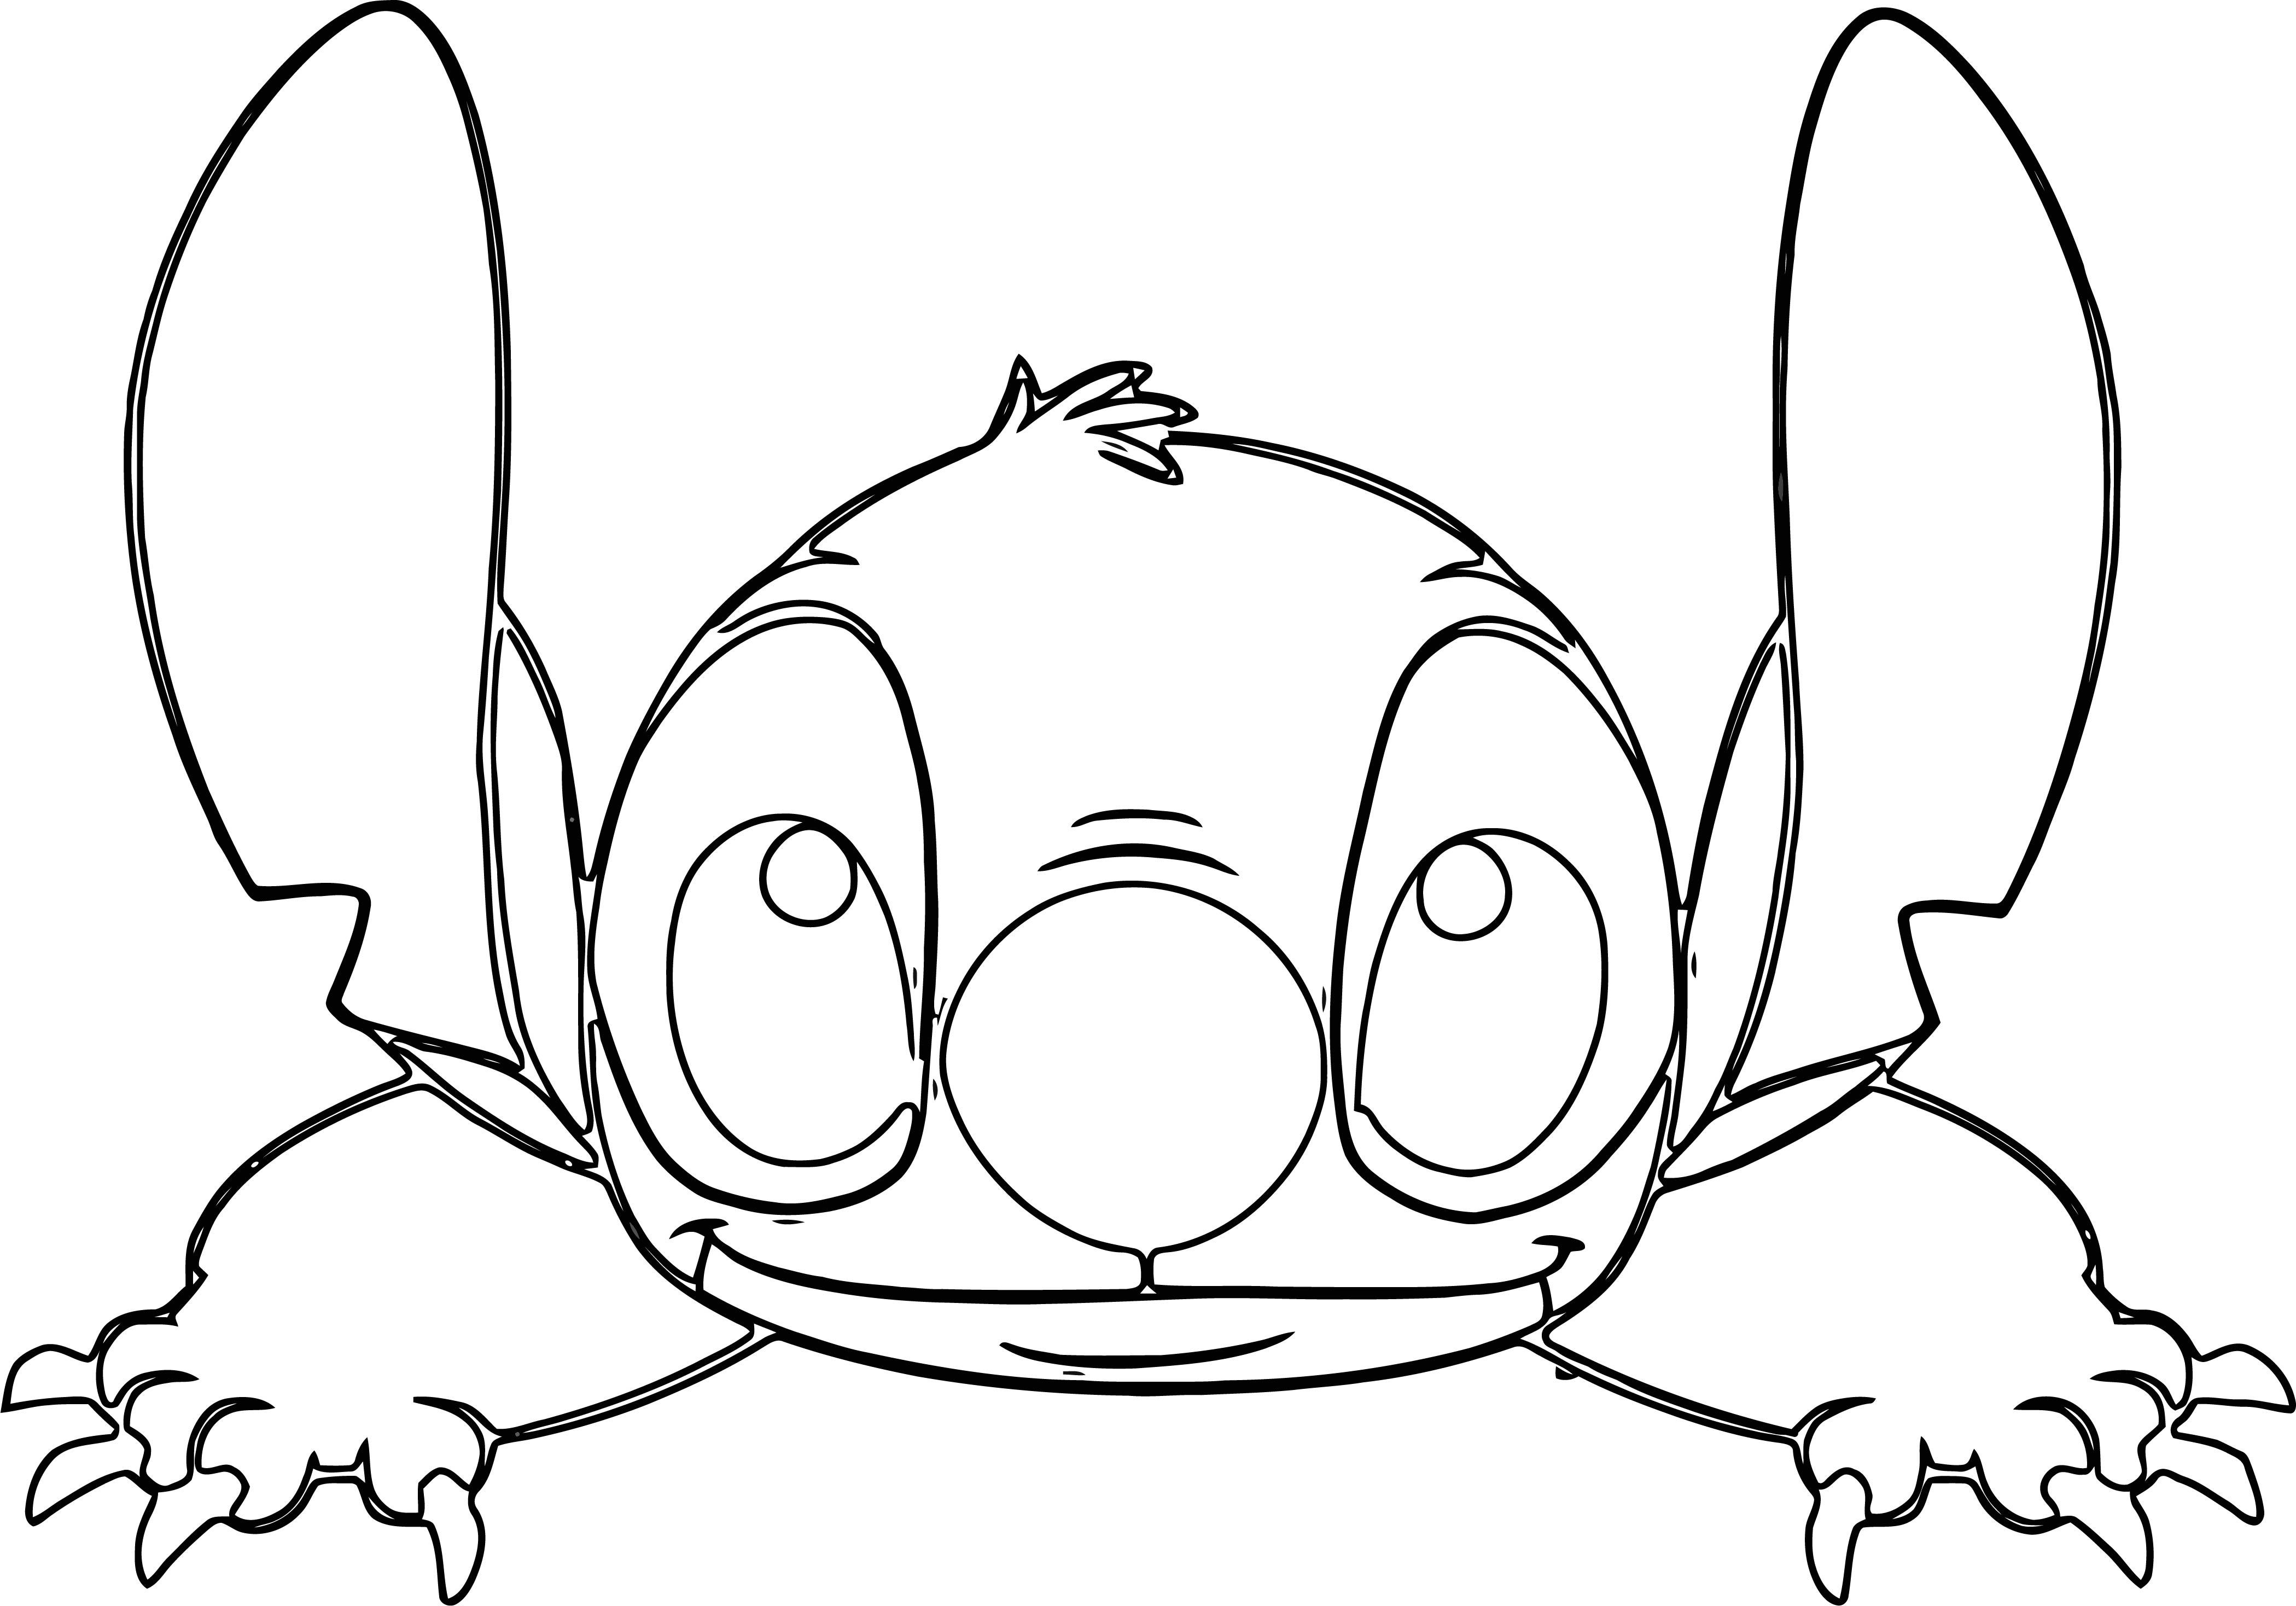 Lilo And Stitch Face Coloring Pages - Wecoloringpage.com